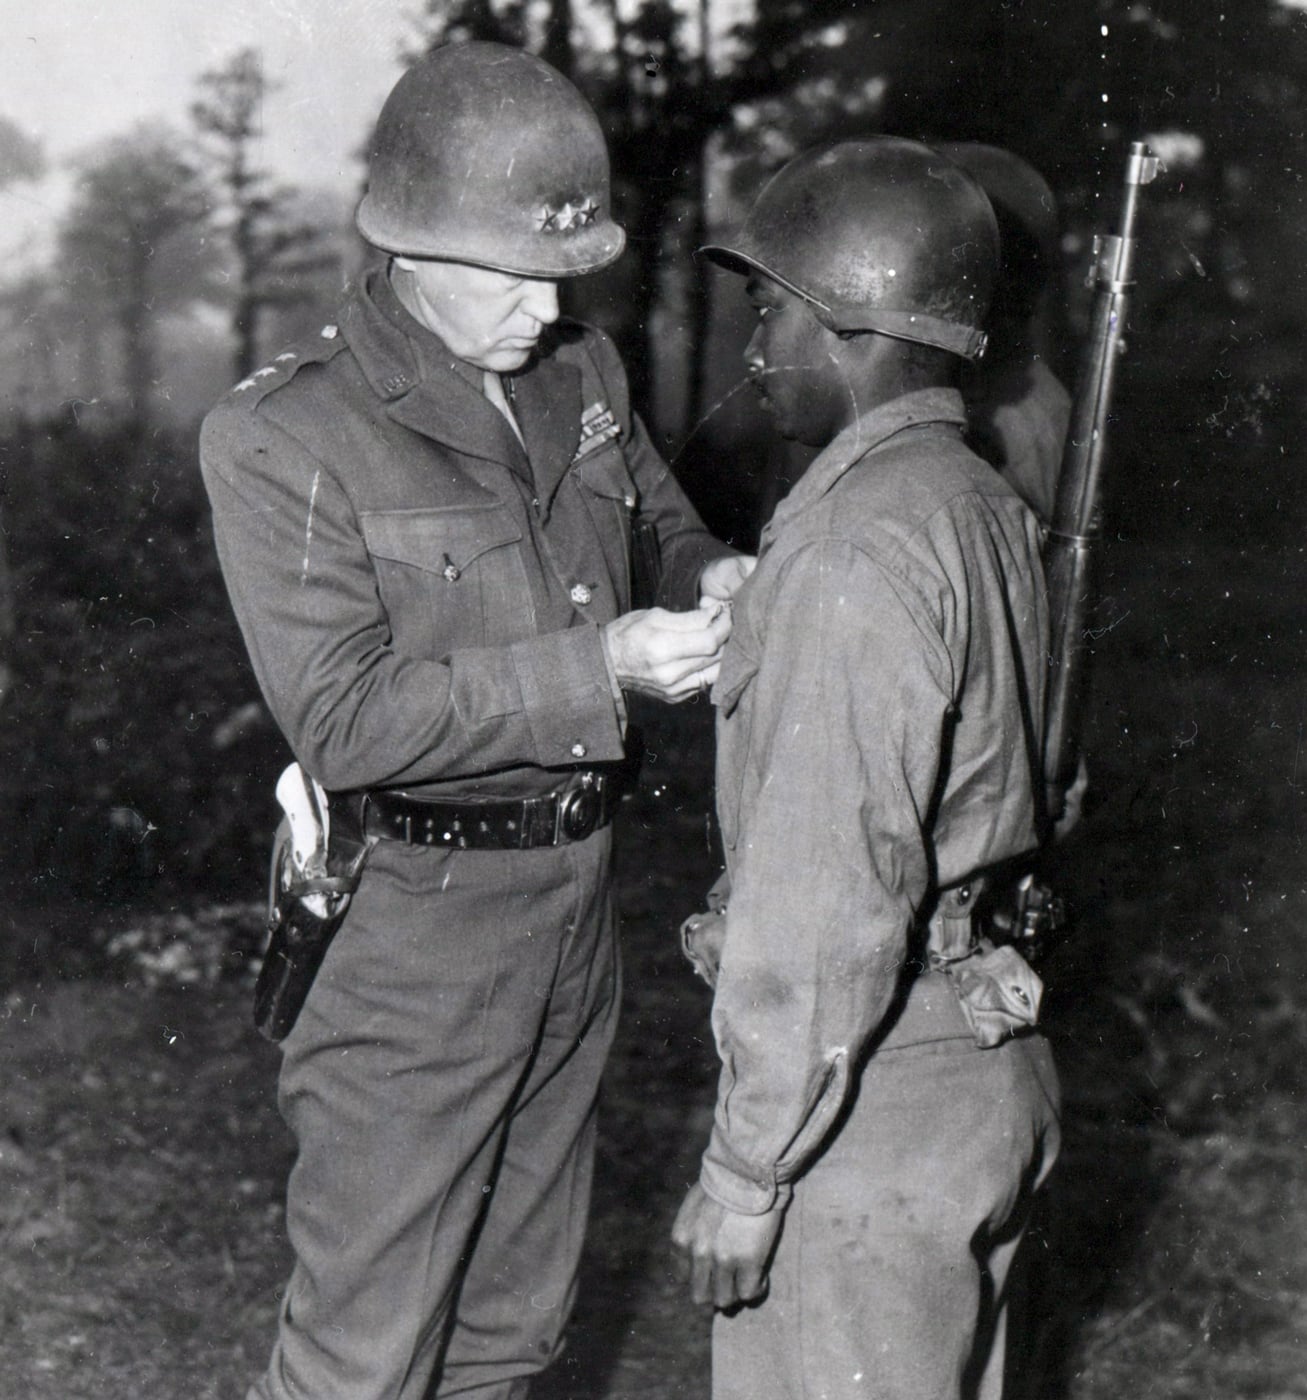 In this image, Gen Patton pins Silver Star on soldier for his heroism in combat.